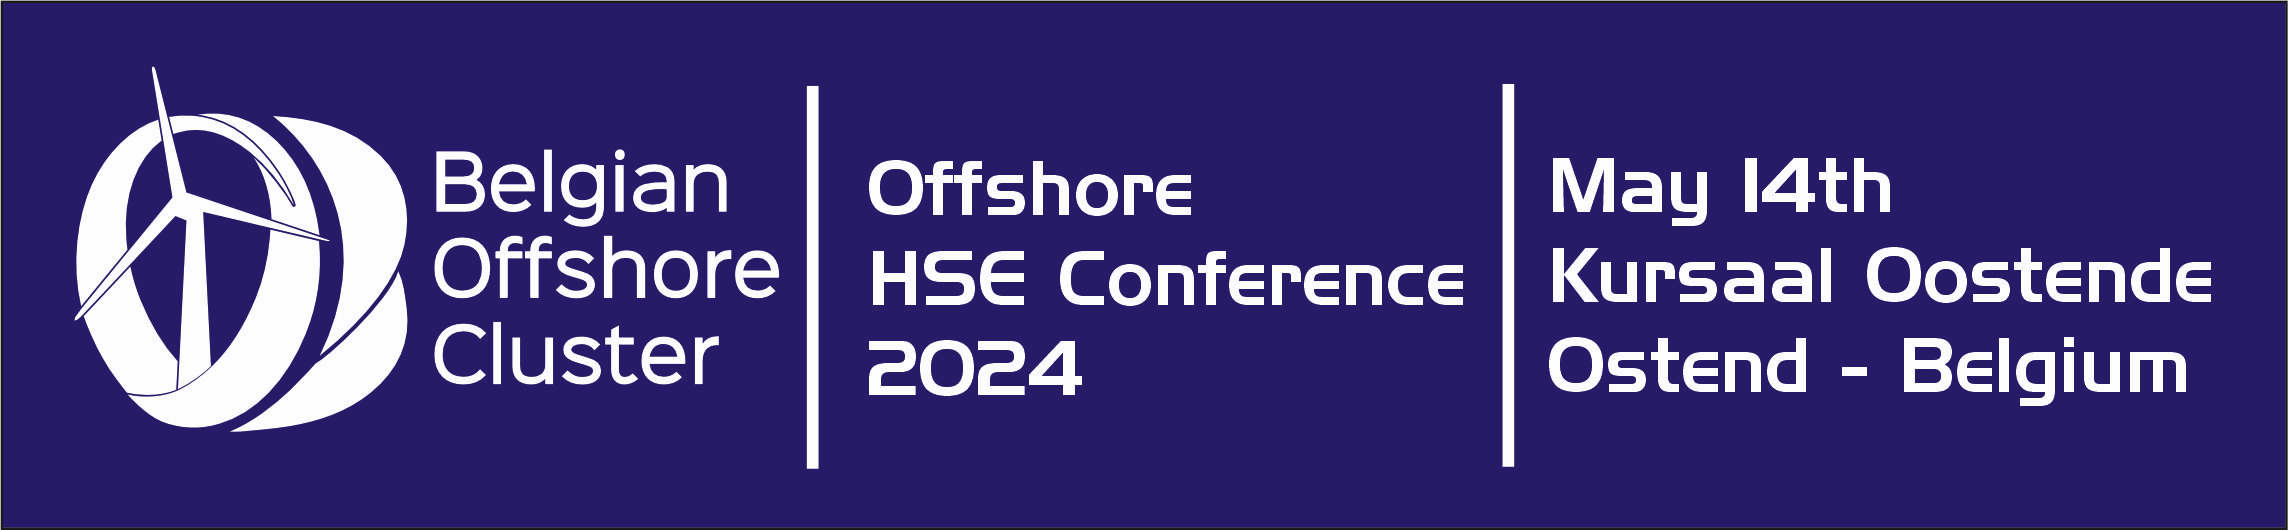 Offshore HSE Conference banner